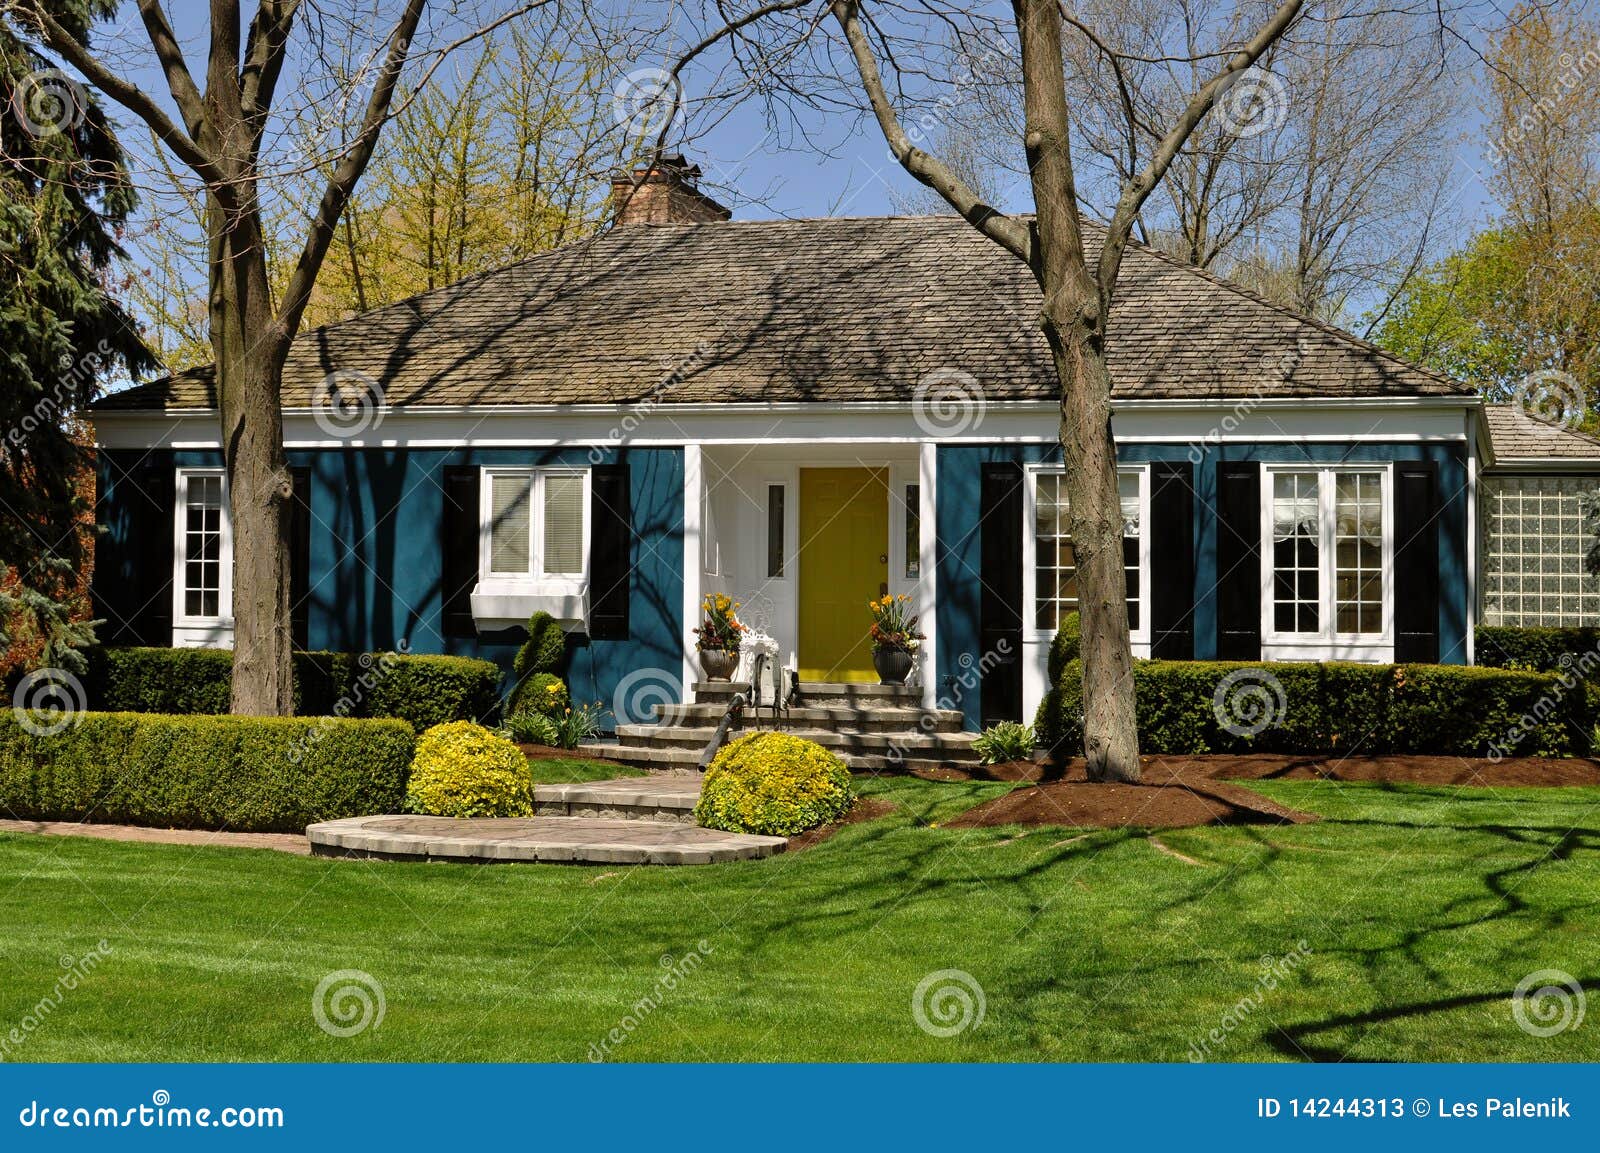 Blue House With Nice Landscaping Stock Image - Image: 14244313